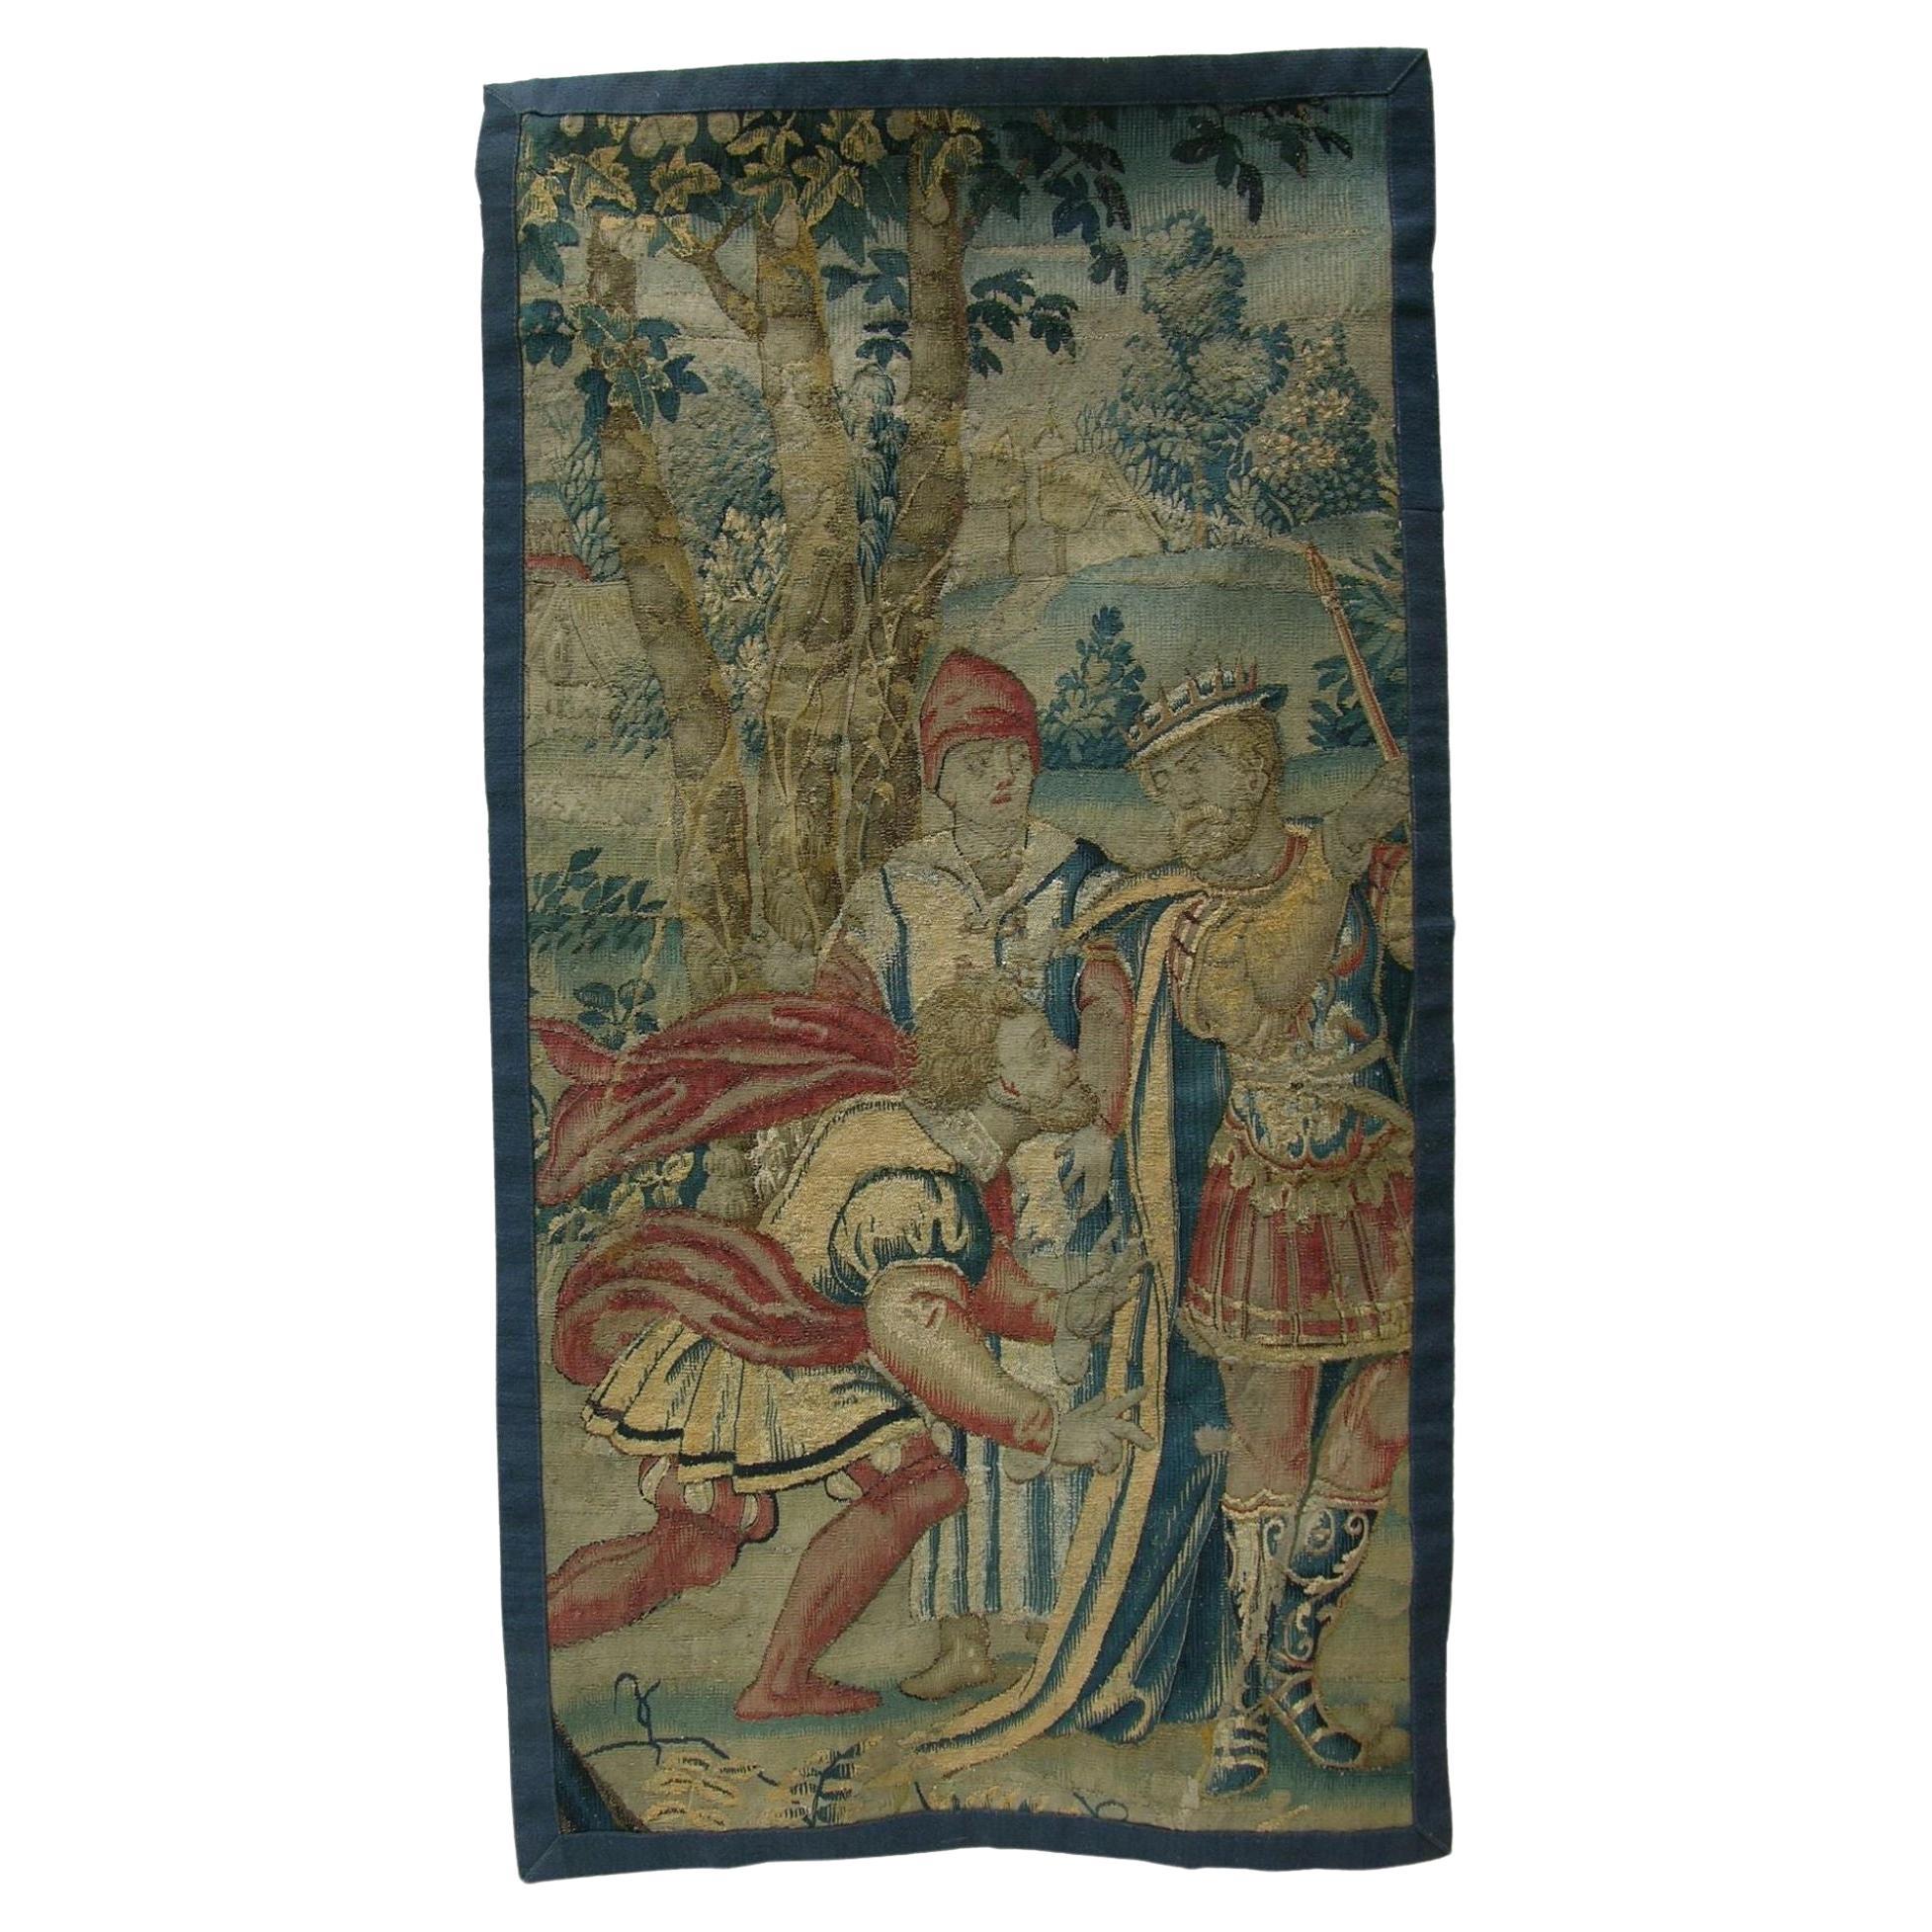 16th Century Antique Brussels Tapestry 5'2" x 2'8"